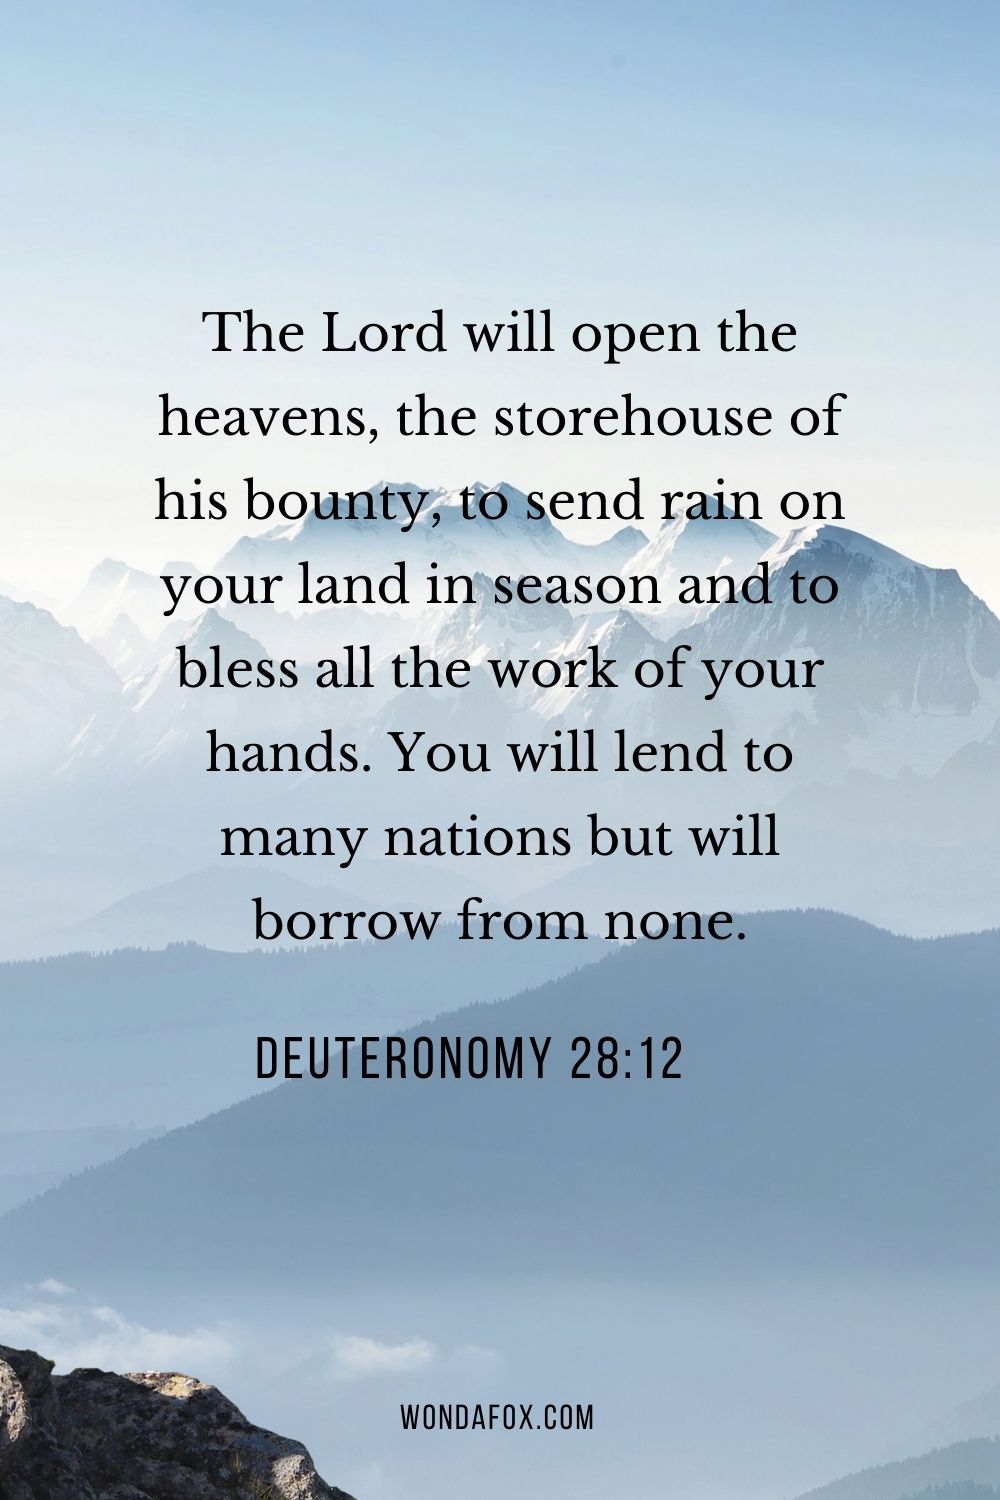  The Lord will open the heavens, the storehouse of his bounty, to send rain on your land in season and to bless all the work of your hands. You will lend to many nations but will borrow from none.